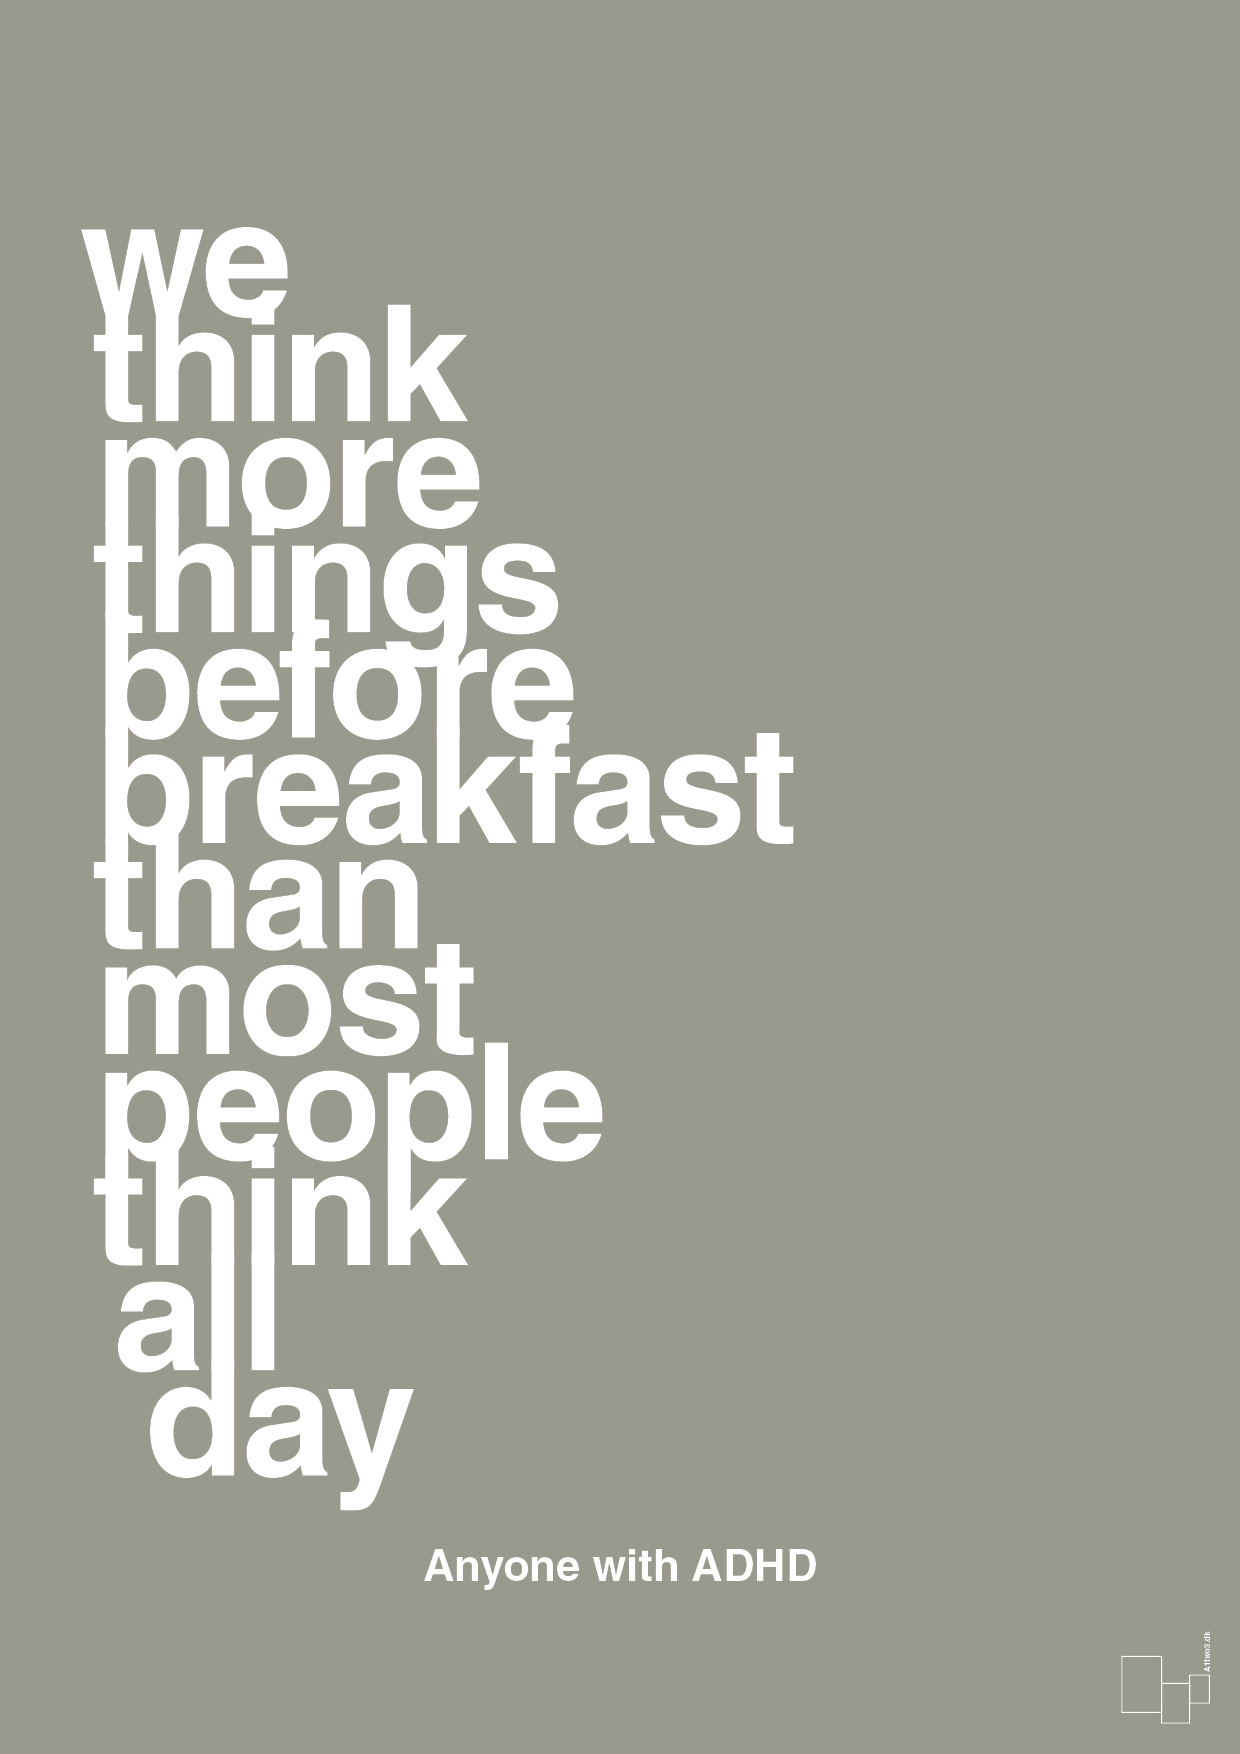 we think more things before breakfast than most people think all day - Plakat med Samfund i Battleship Gray